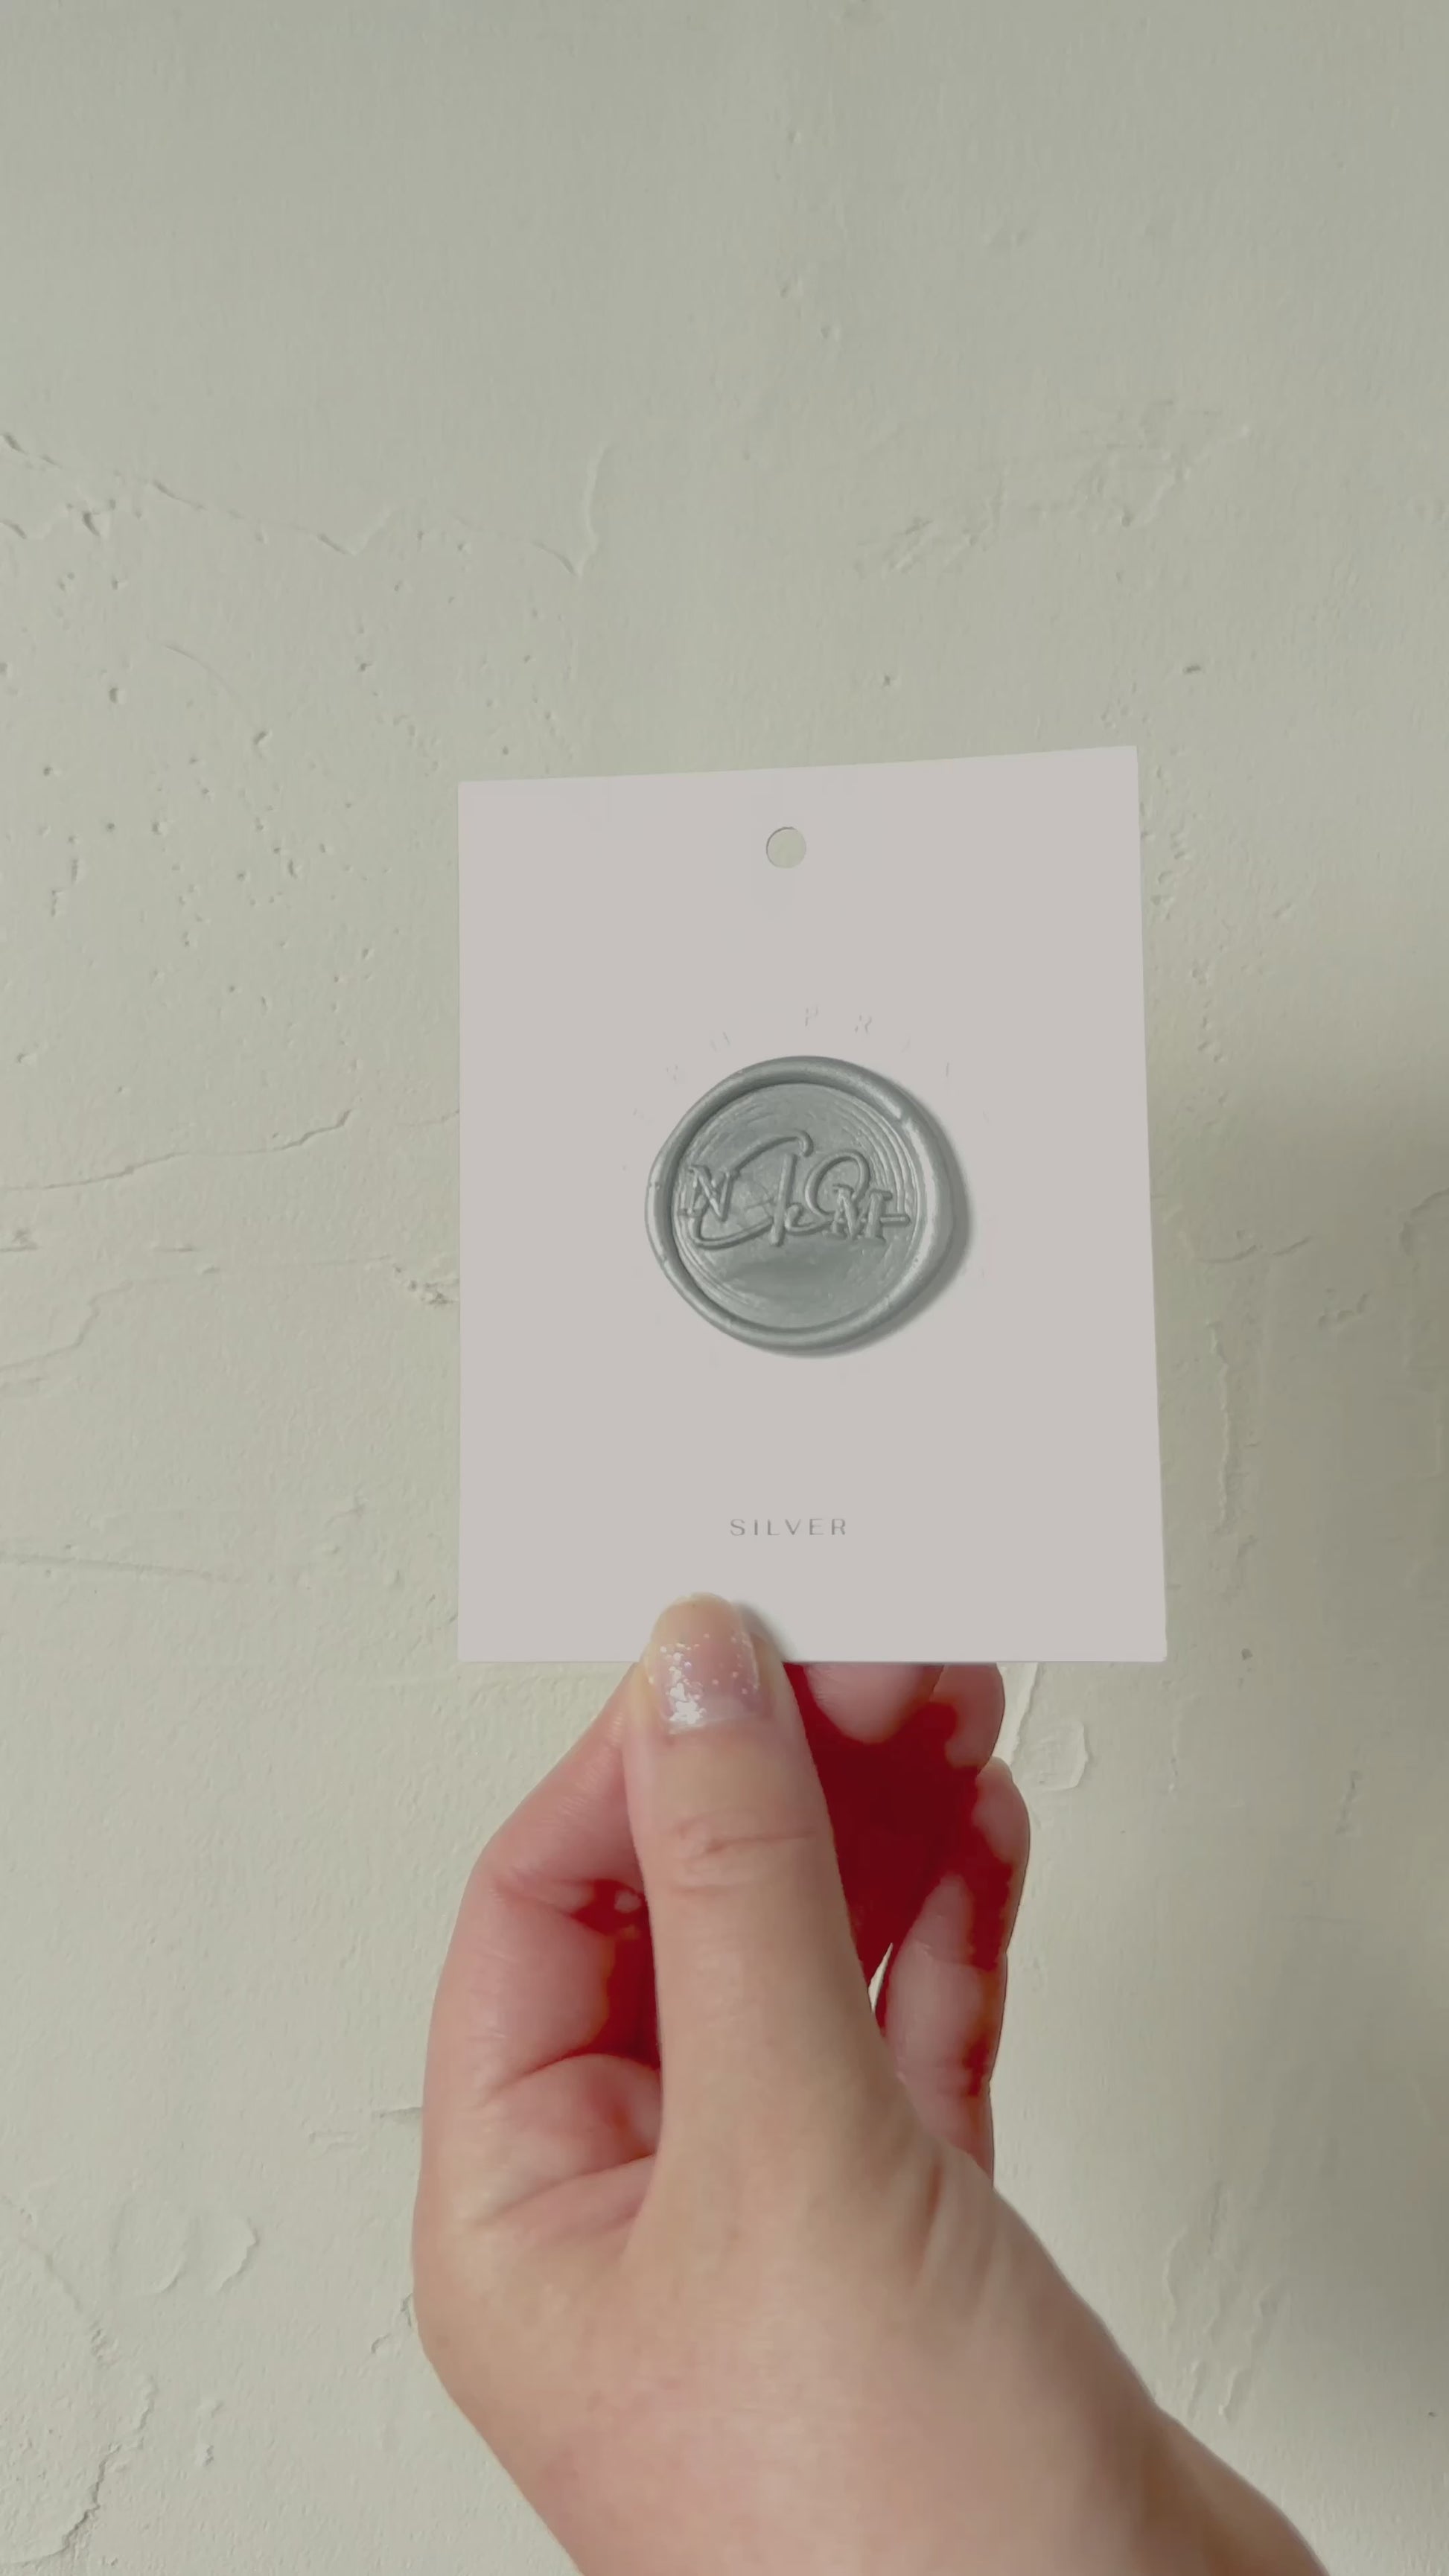 Video of Silver wax seal stamp sample on textured background